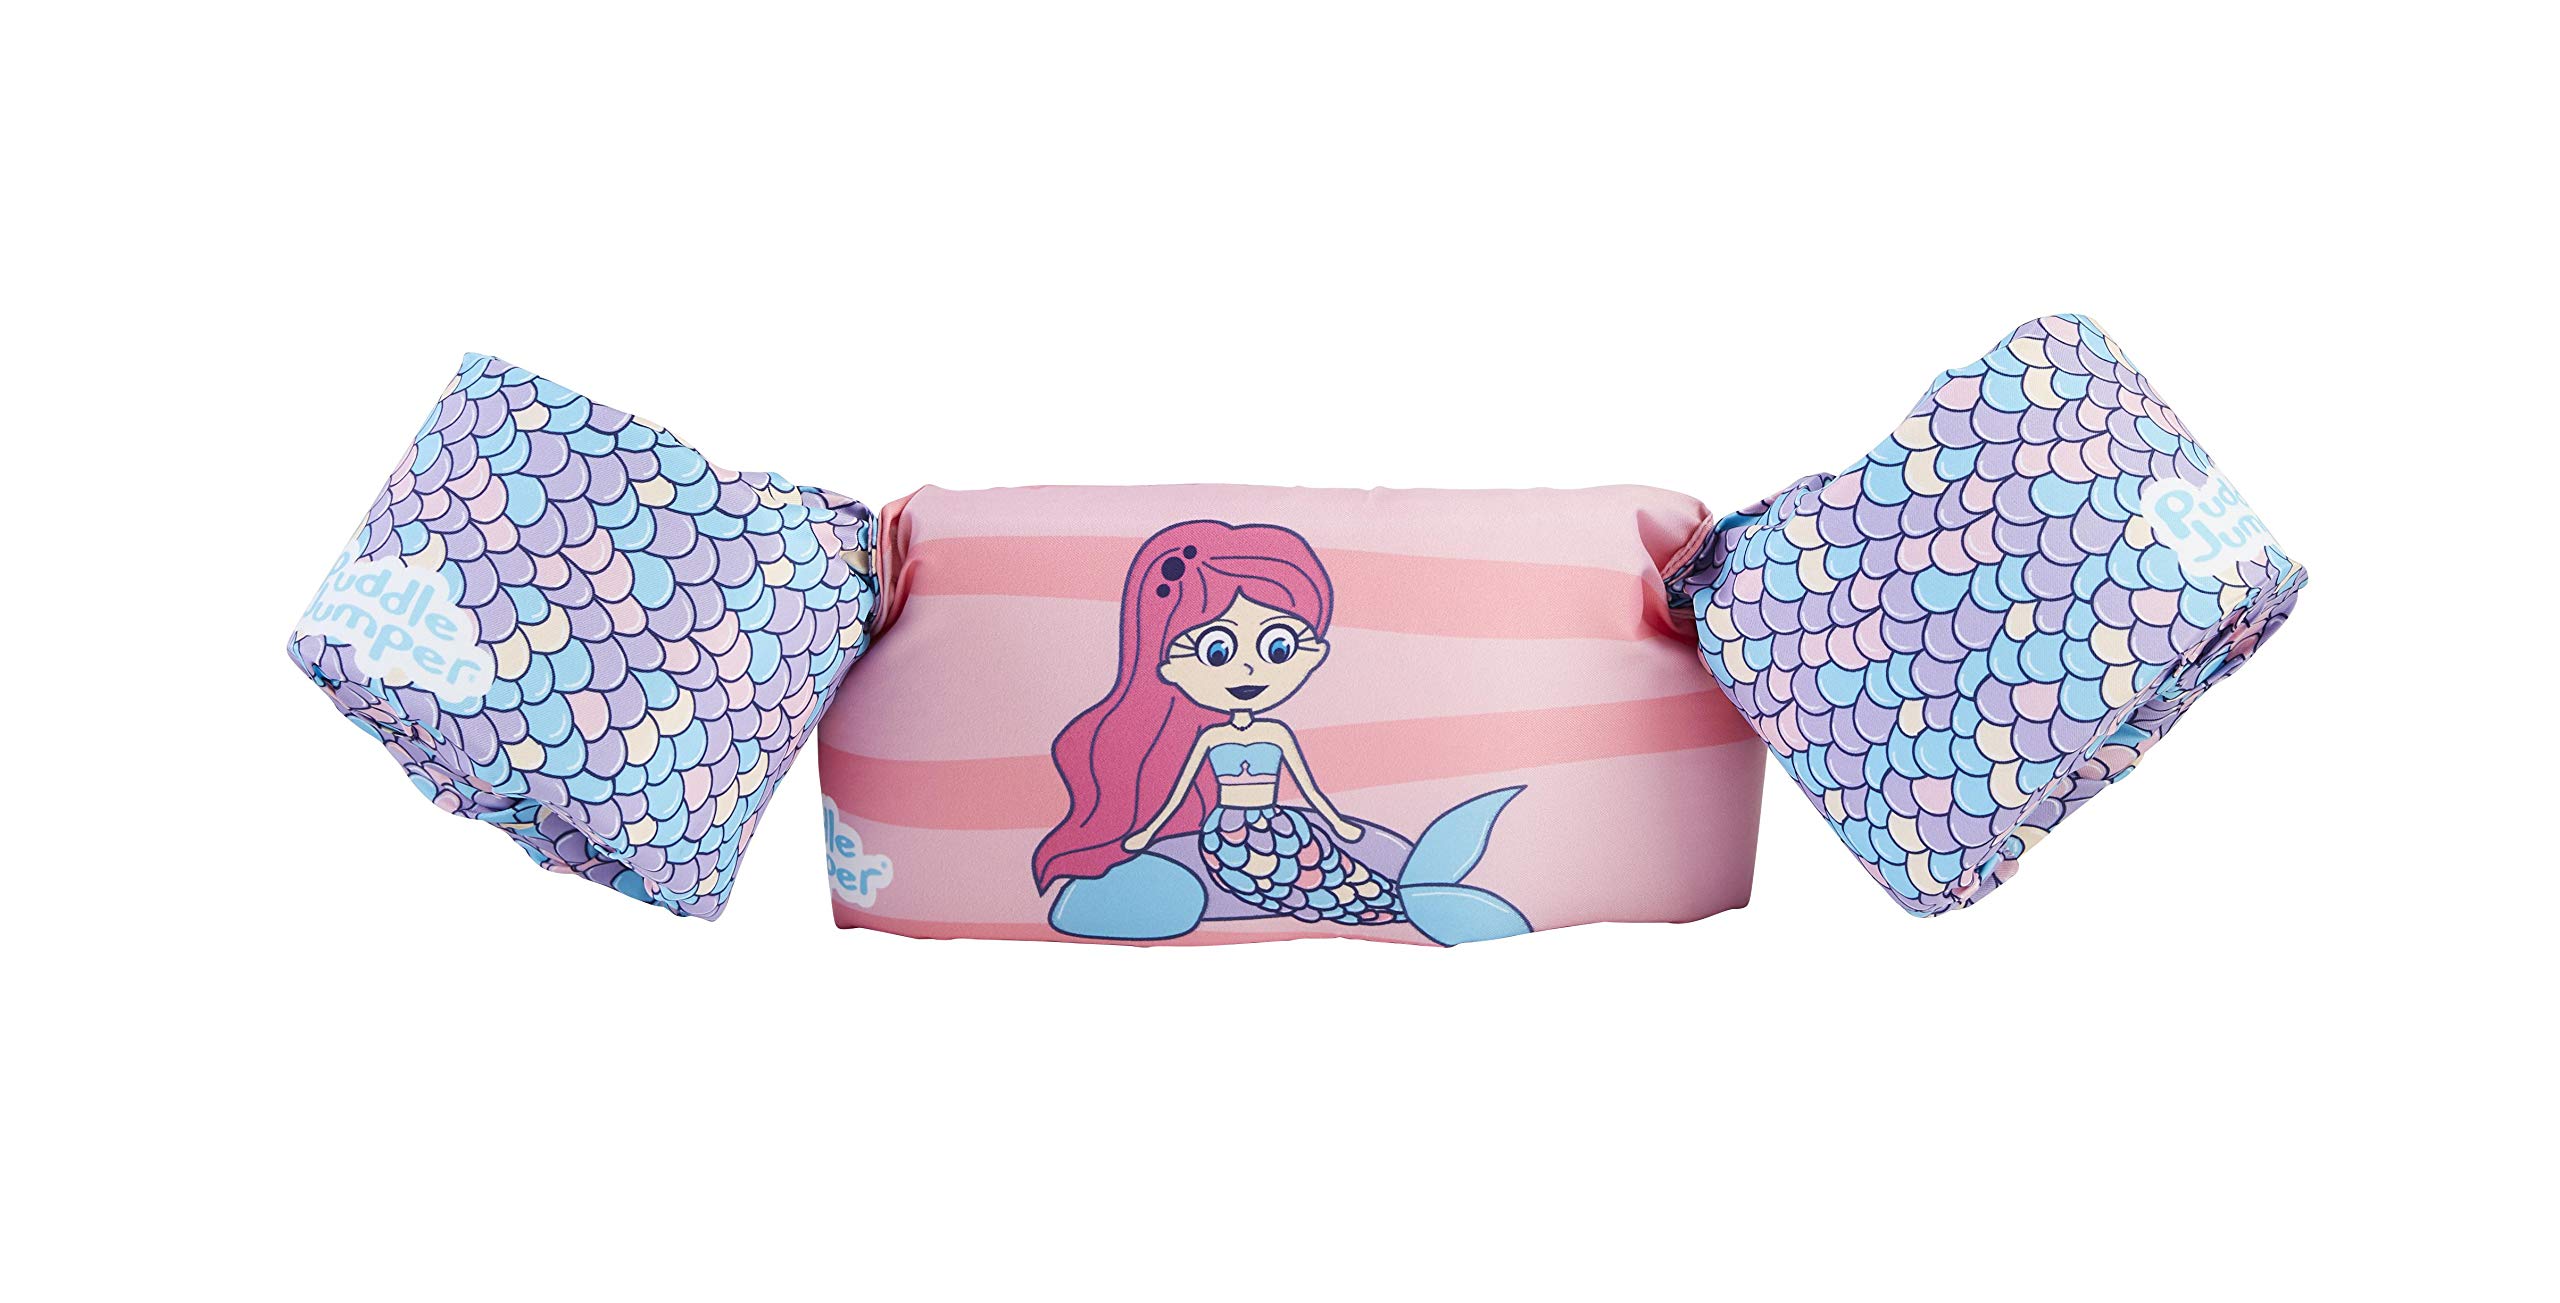 Stearns Original Puddle Jumper Toddler & Little Kids' Life Jacket (Mermaid, Fits 30-50 Pounds) $8.98 + Free Shipping w/ Prime or on $25+